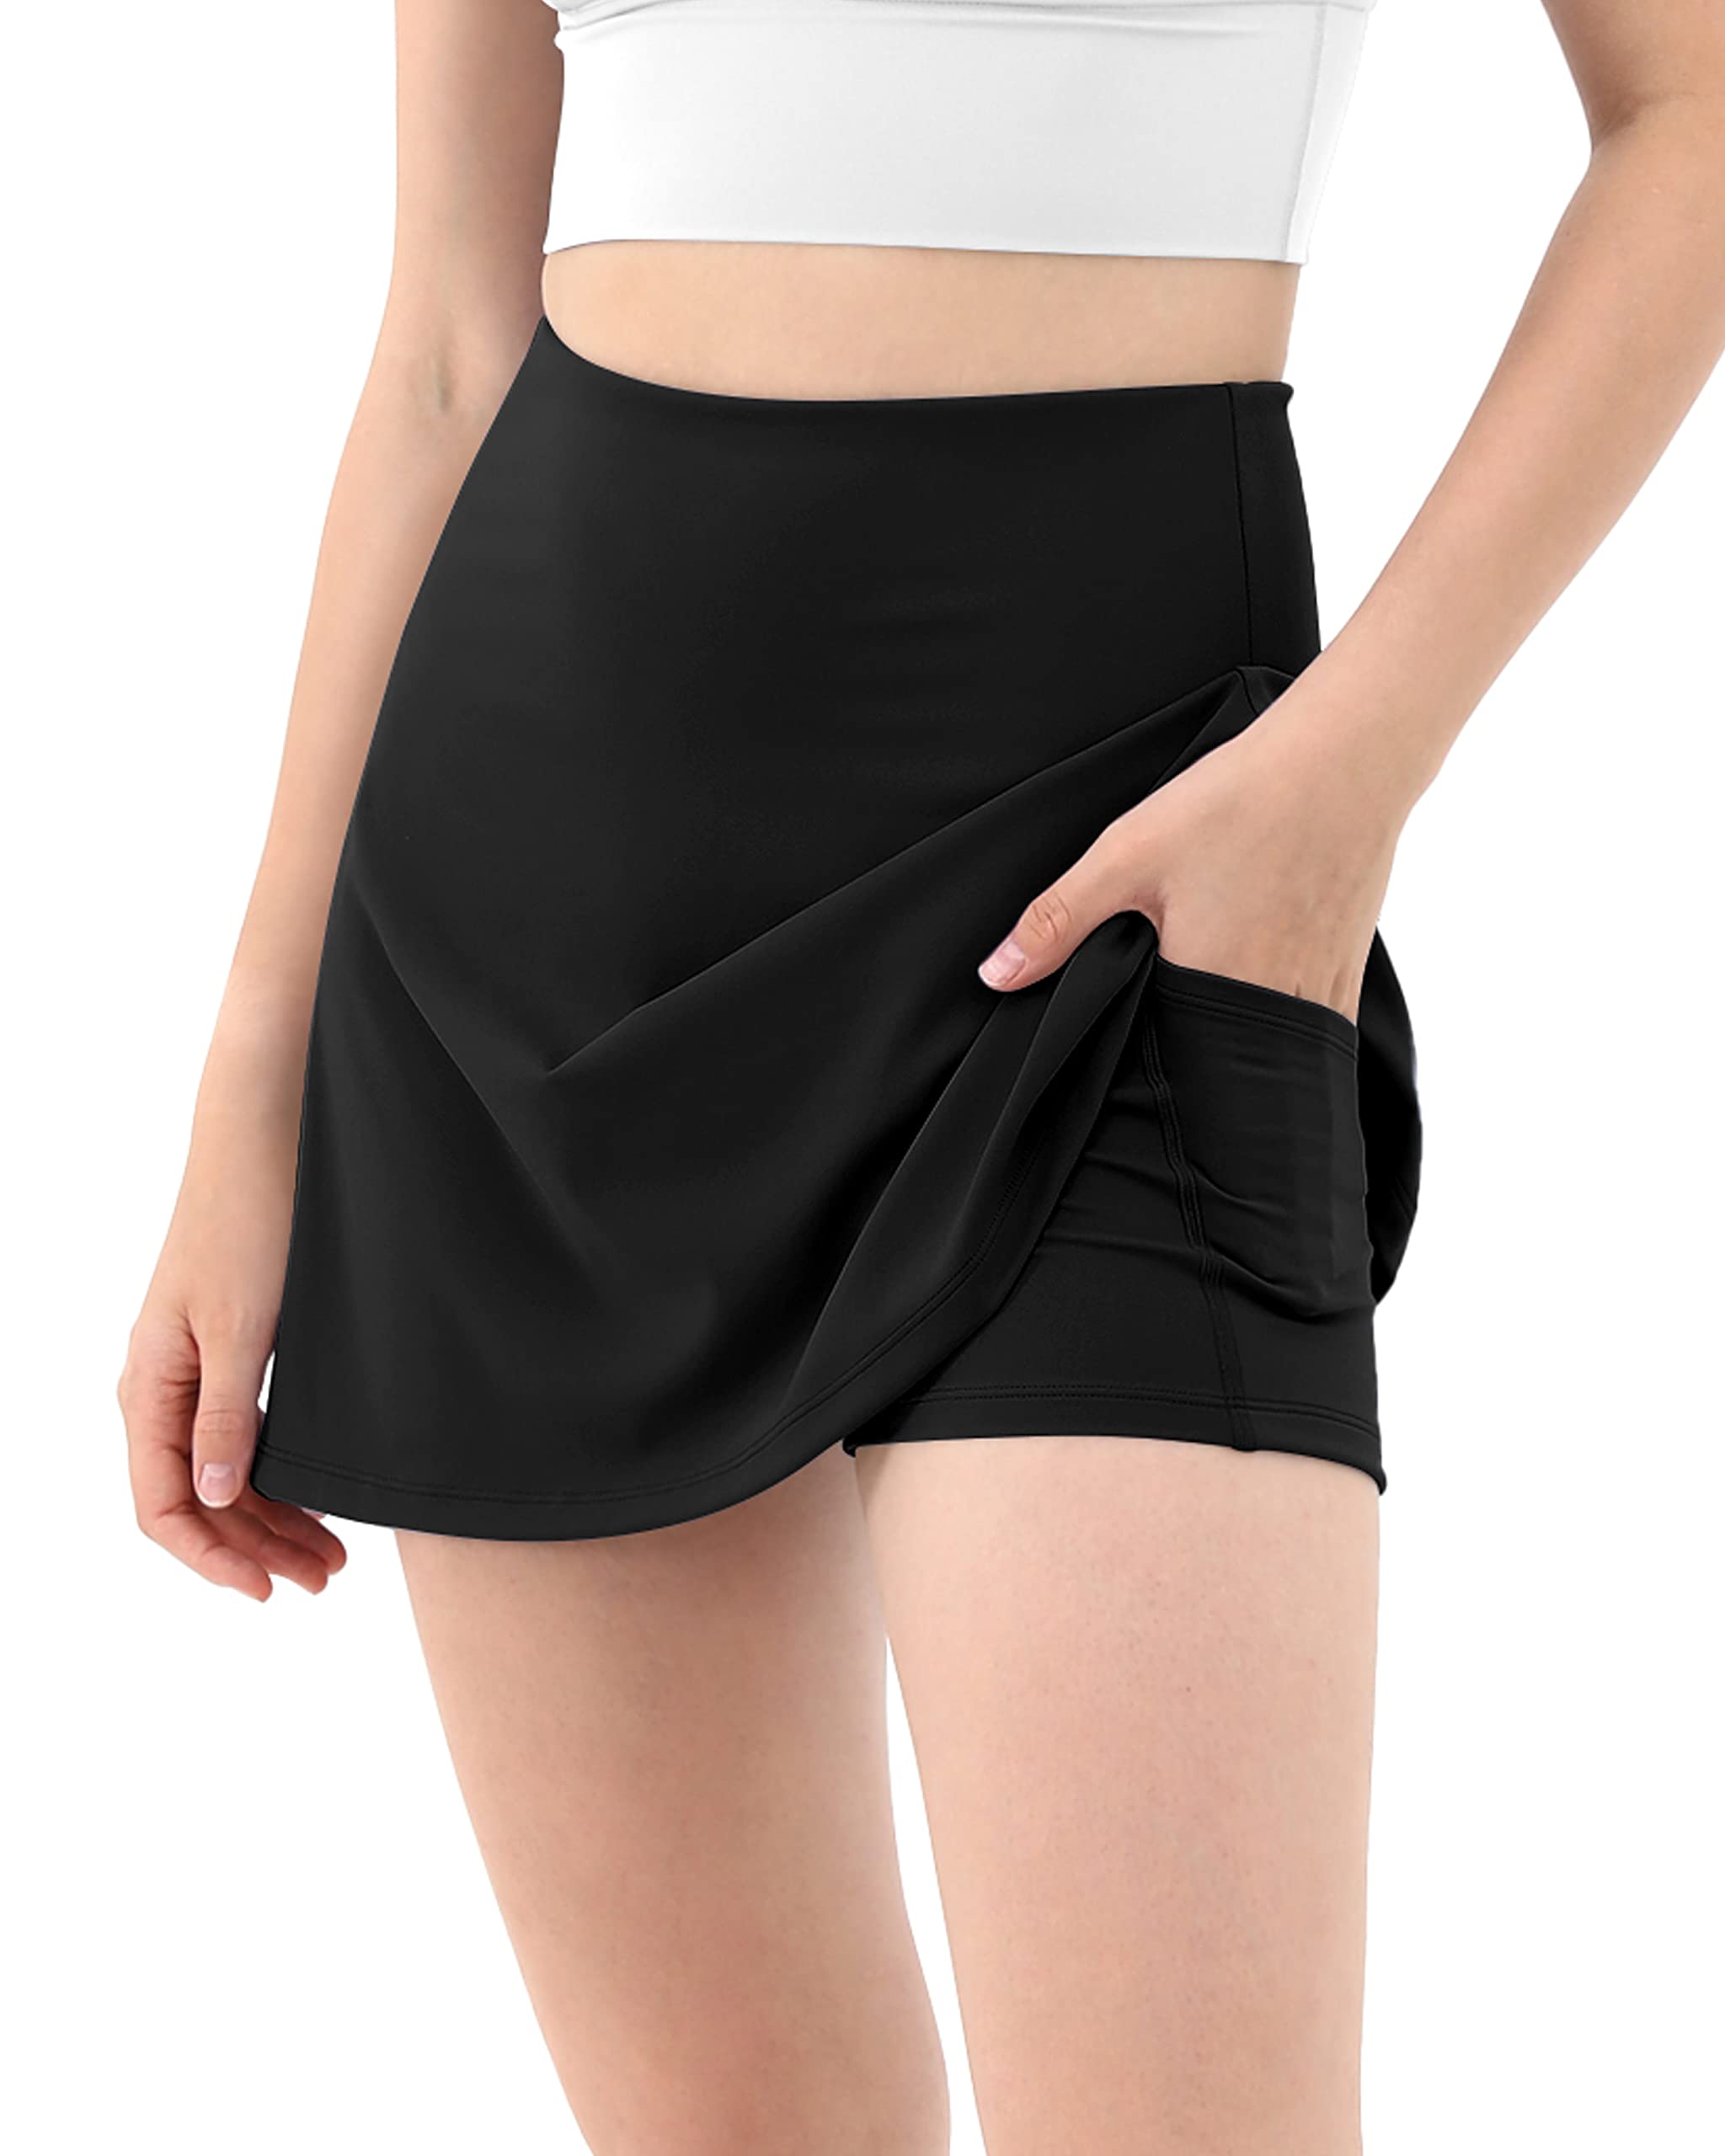 ODODOS Women's Athletic Tennis Skorts with Pockets Built-in Shorts